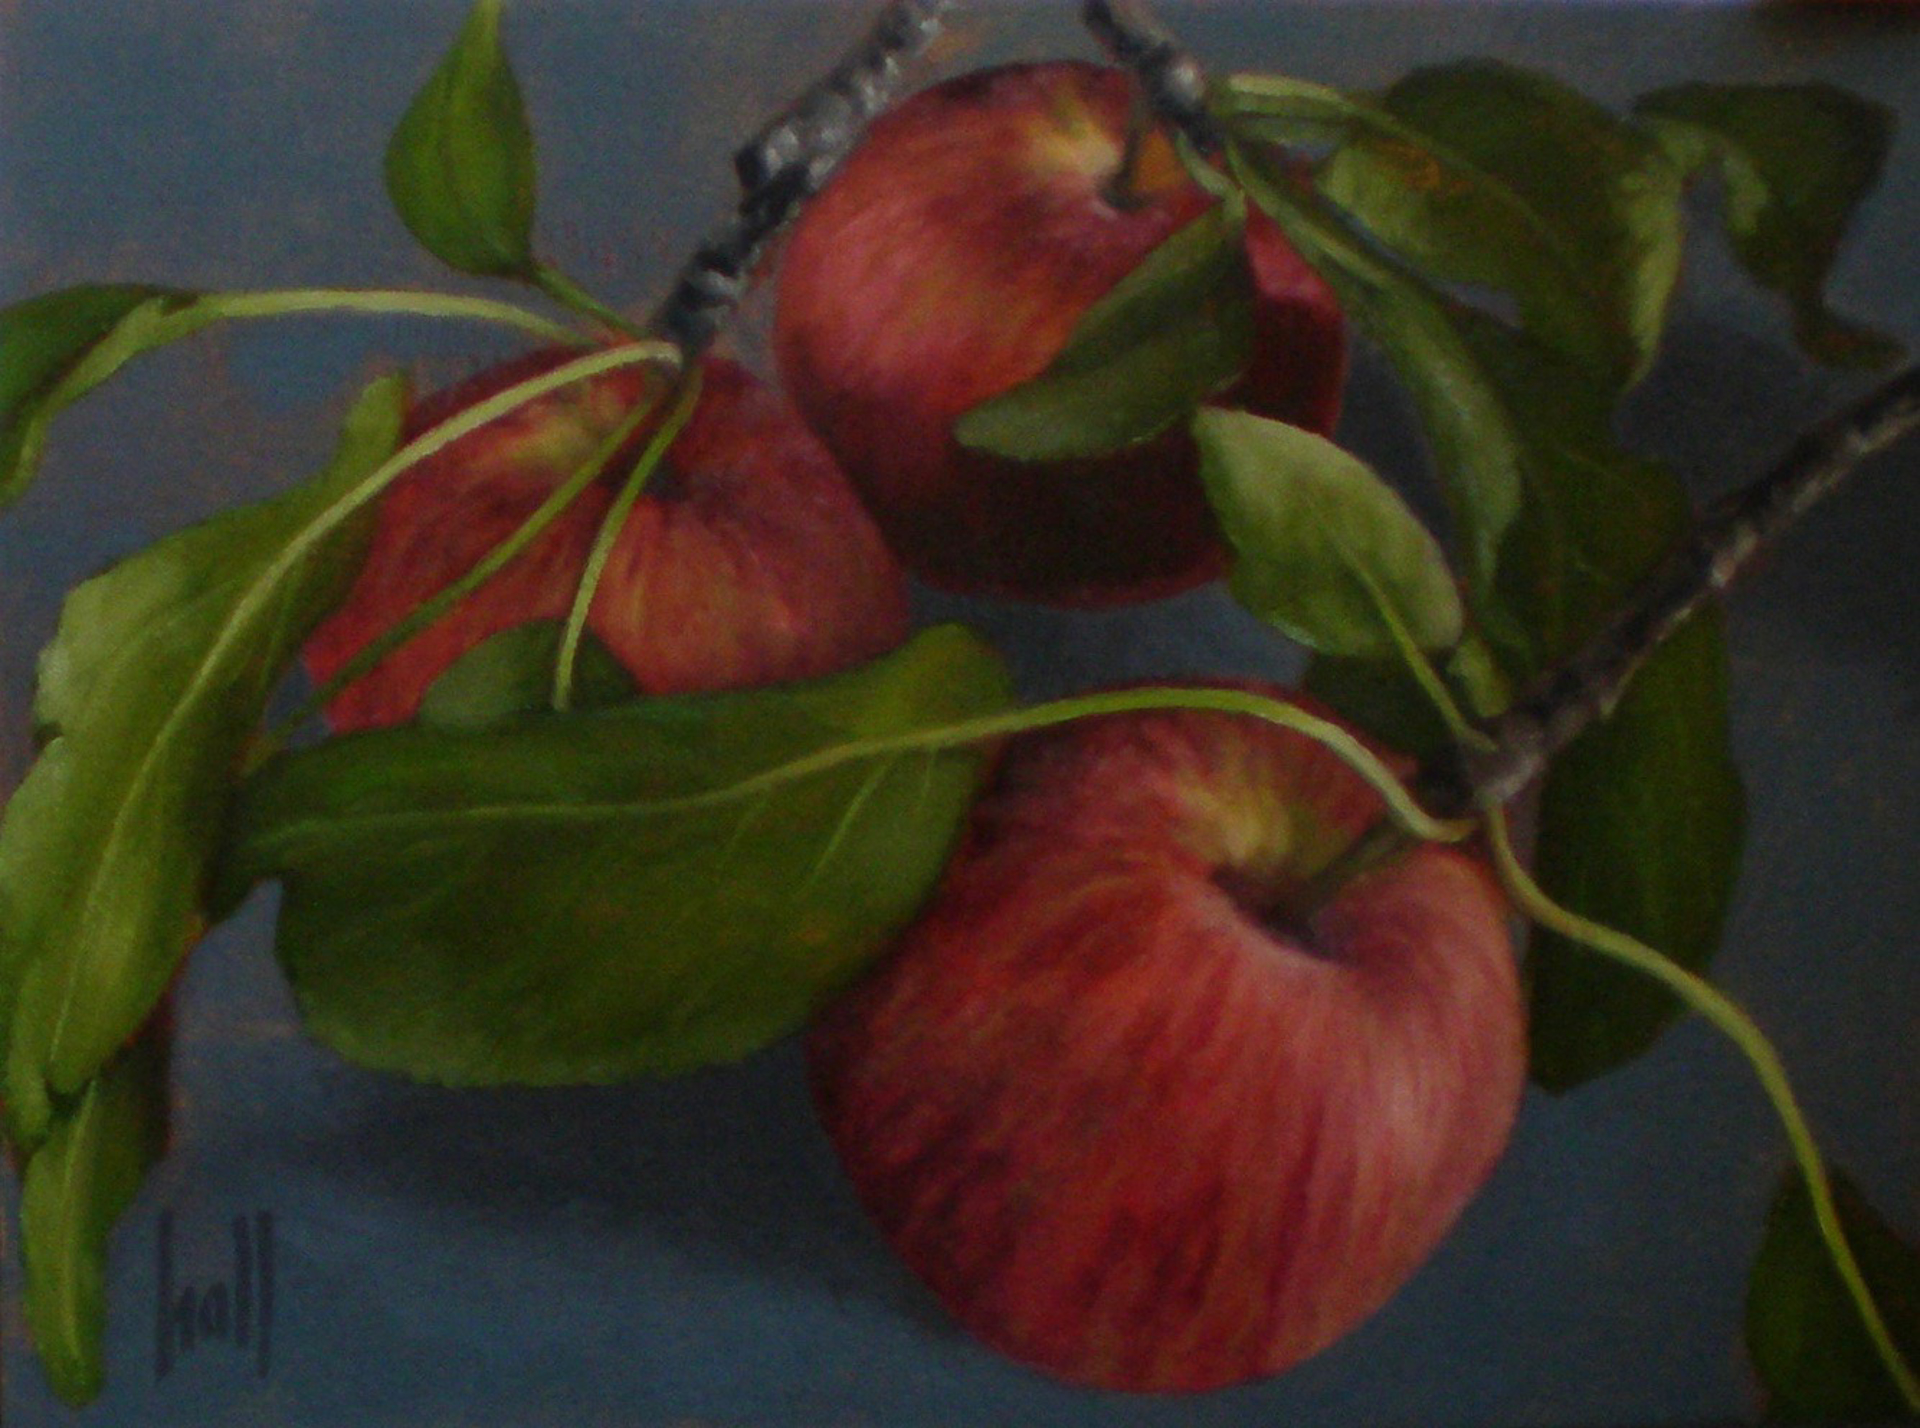 Fresh Apples by Wendy Hall